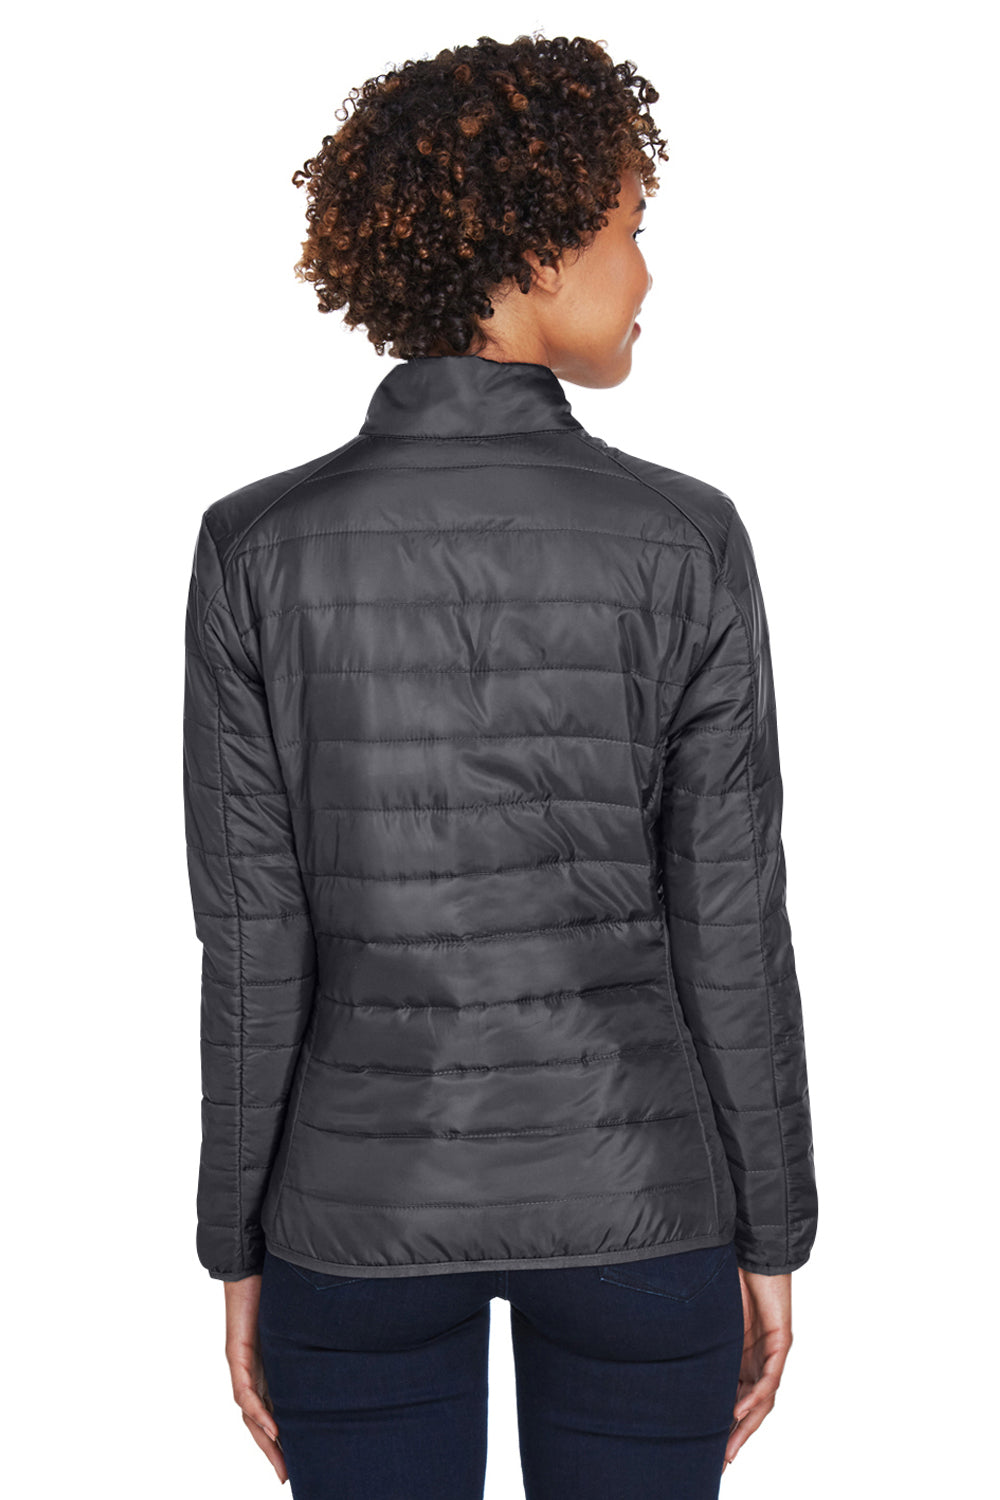 Core 365 CE700W Womens Prevail Packable Puffer Water Resistant Full Zip Jacket Carbon Grey Back